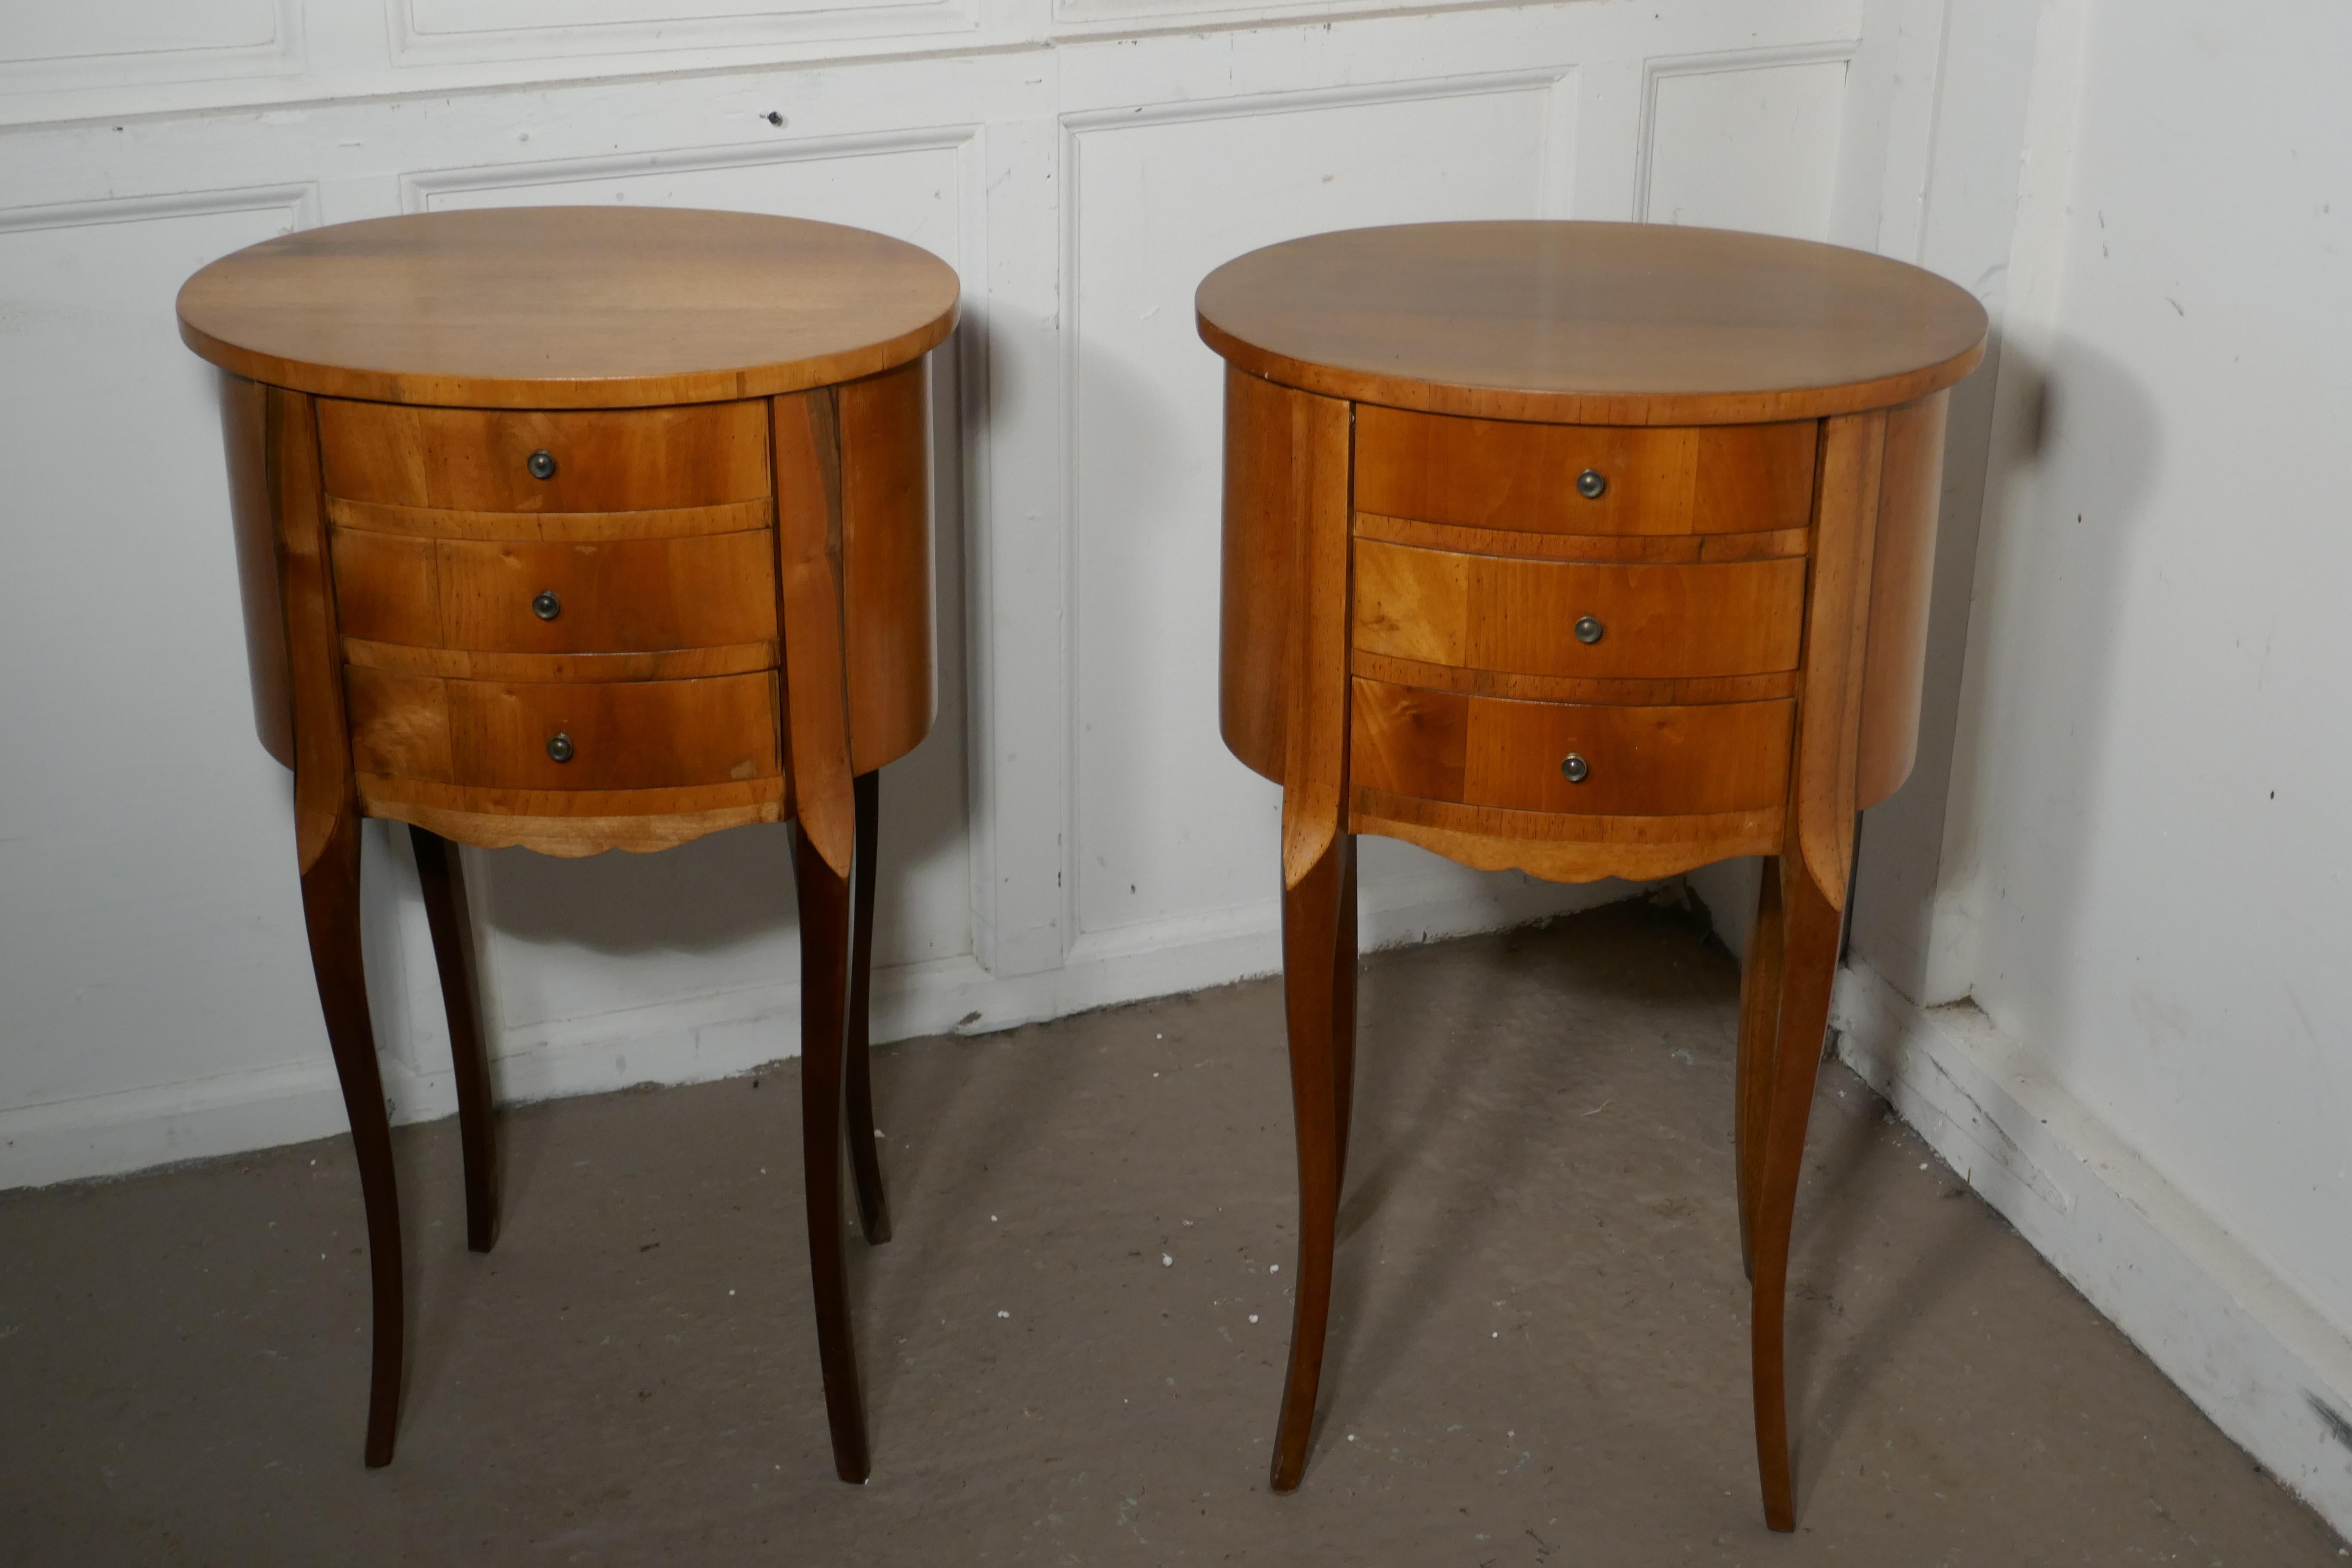 Pair of French golden cherry oval bedside cabinets

This is a pretty pair of cabinets or chevets, they are made in golden cherry and have an oval shape, they each have 3 drawers to the front and stand on splayed legs

The cabinets are in good